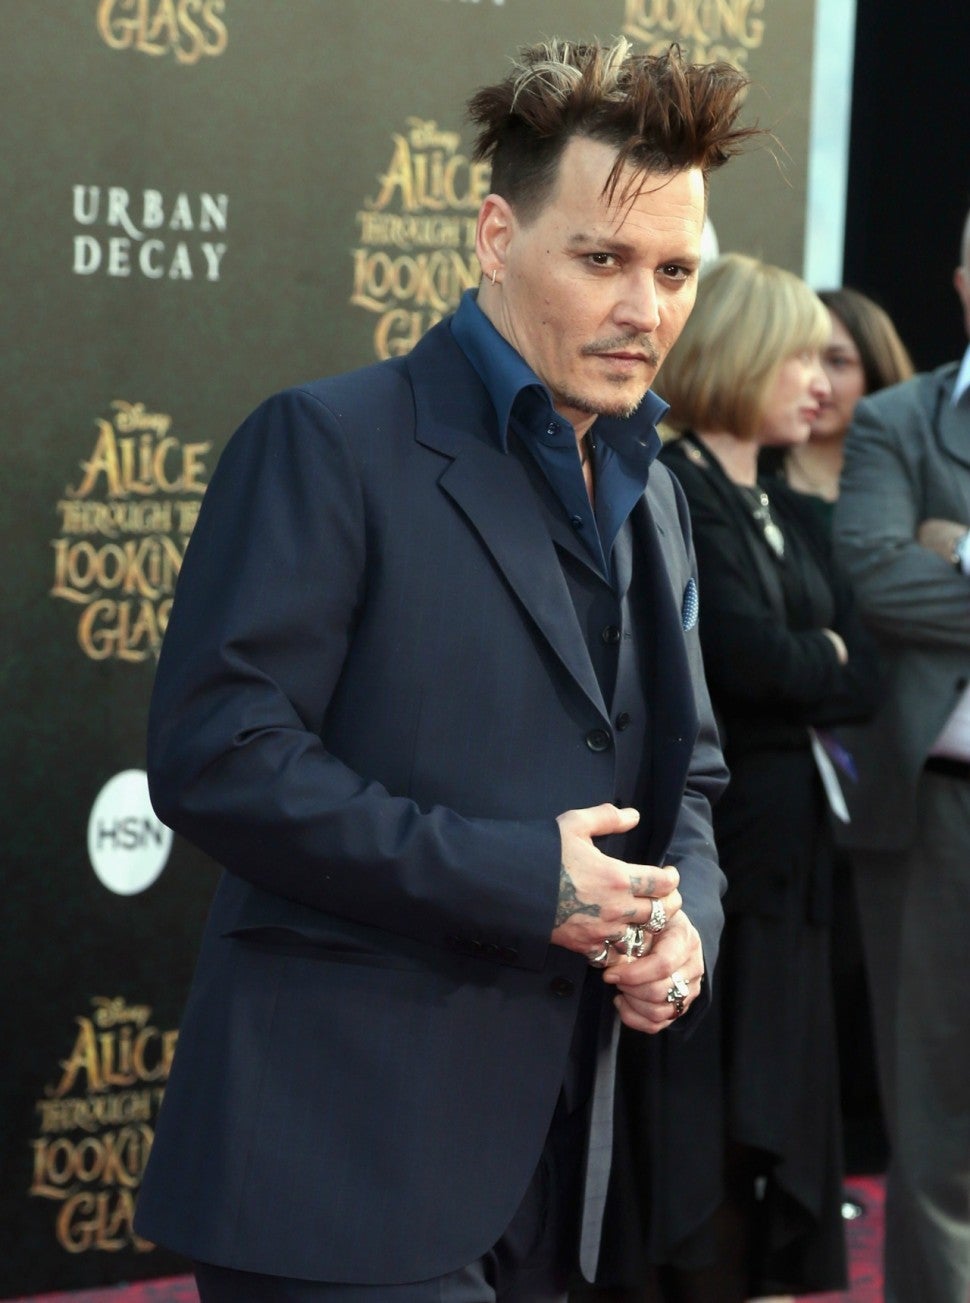 Johnny Depp Debuts Bold New Haircut Gushes About Daughter LilyRoses  Chanel Modeling Shes Killing It  Entertainment Tonight